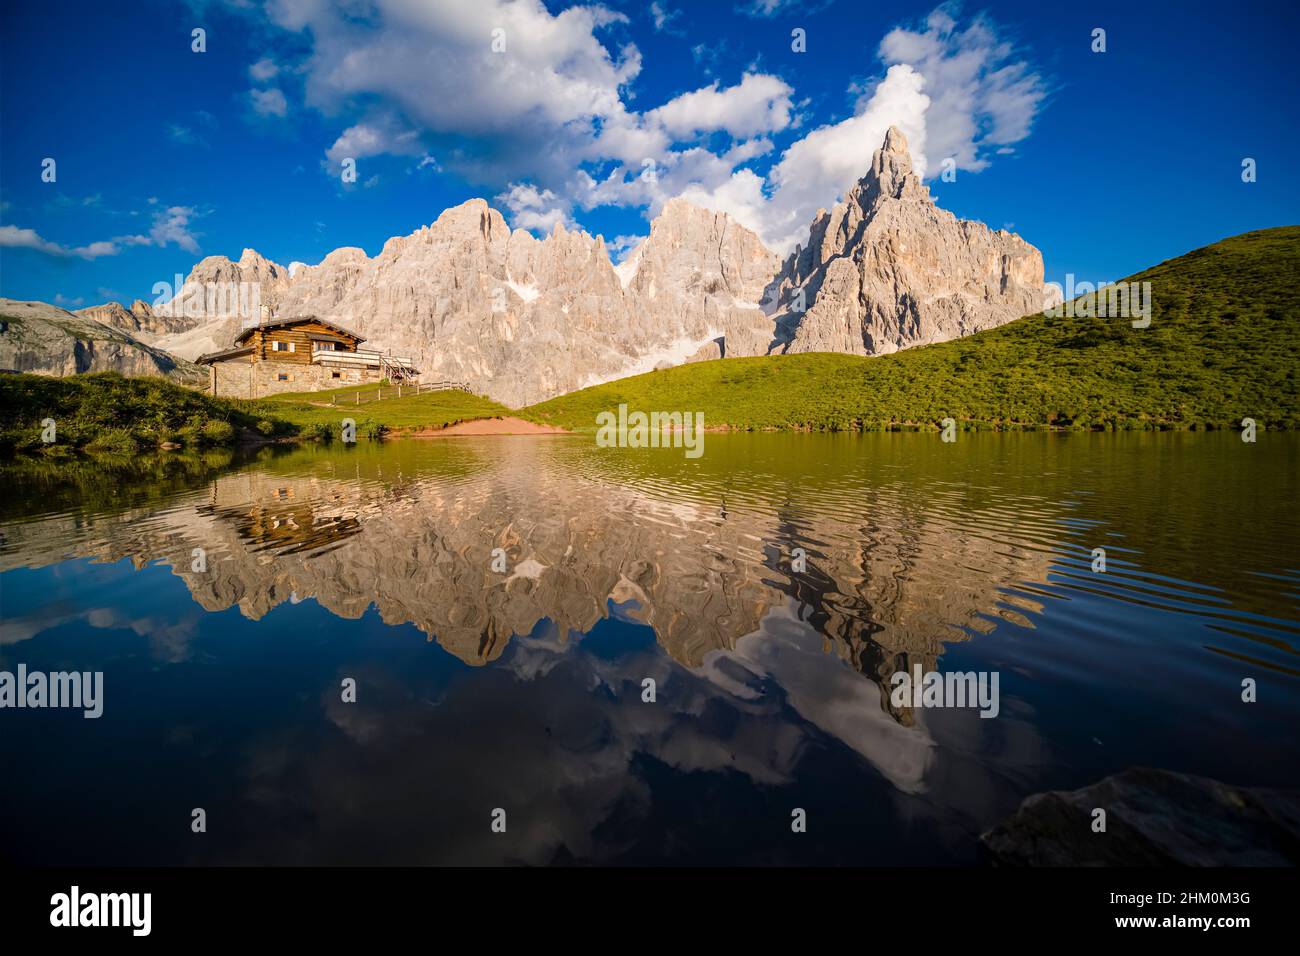 Baita Segantini, an alpine hut and summits and rock faces of the Pala group, Cimon della Pala, one of the main summits, standing out, reflecting in a Stock Photo